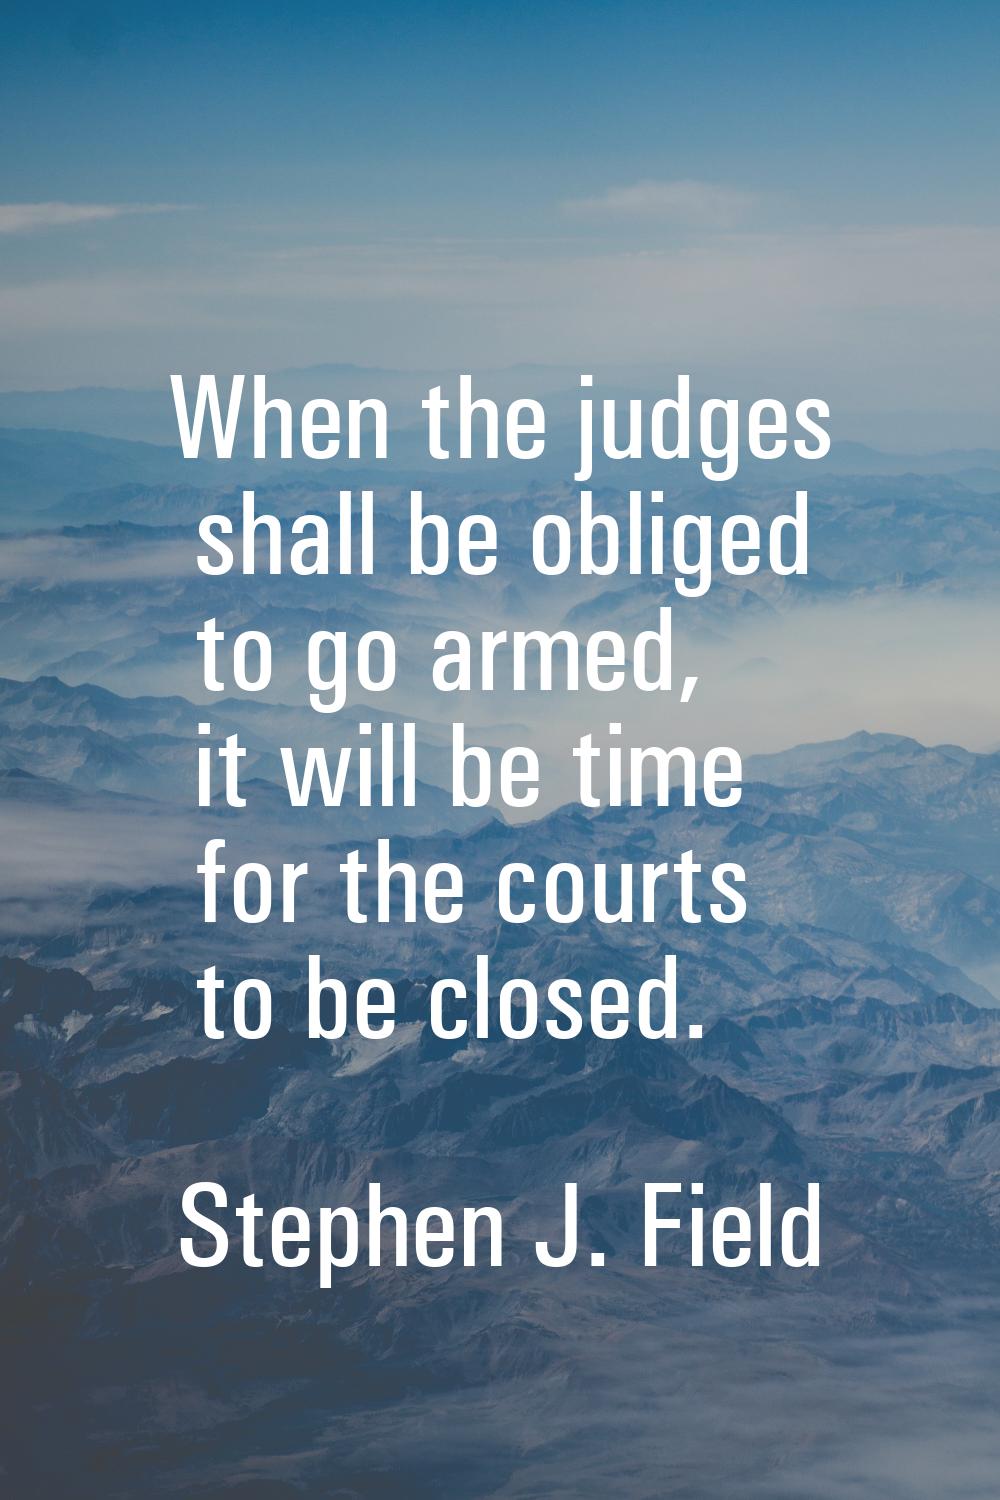 When the judges shall be obliged to go armed, it will be time for the courts to be closed.